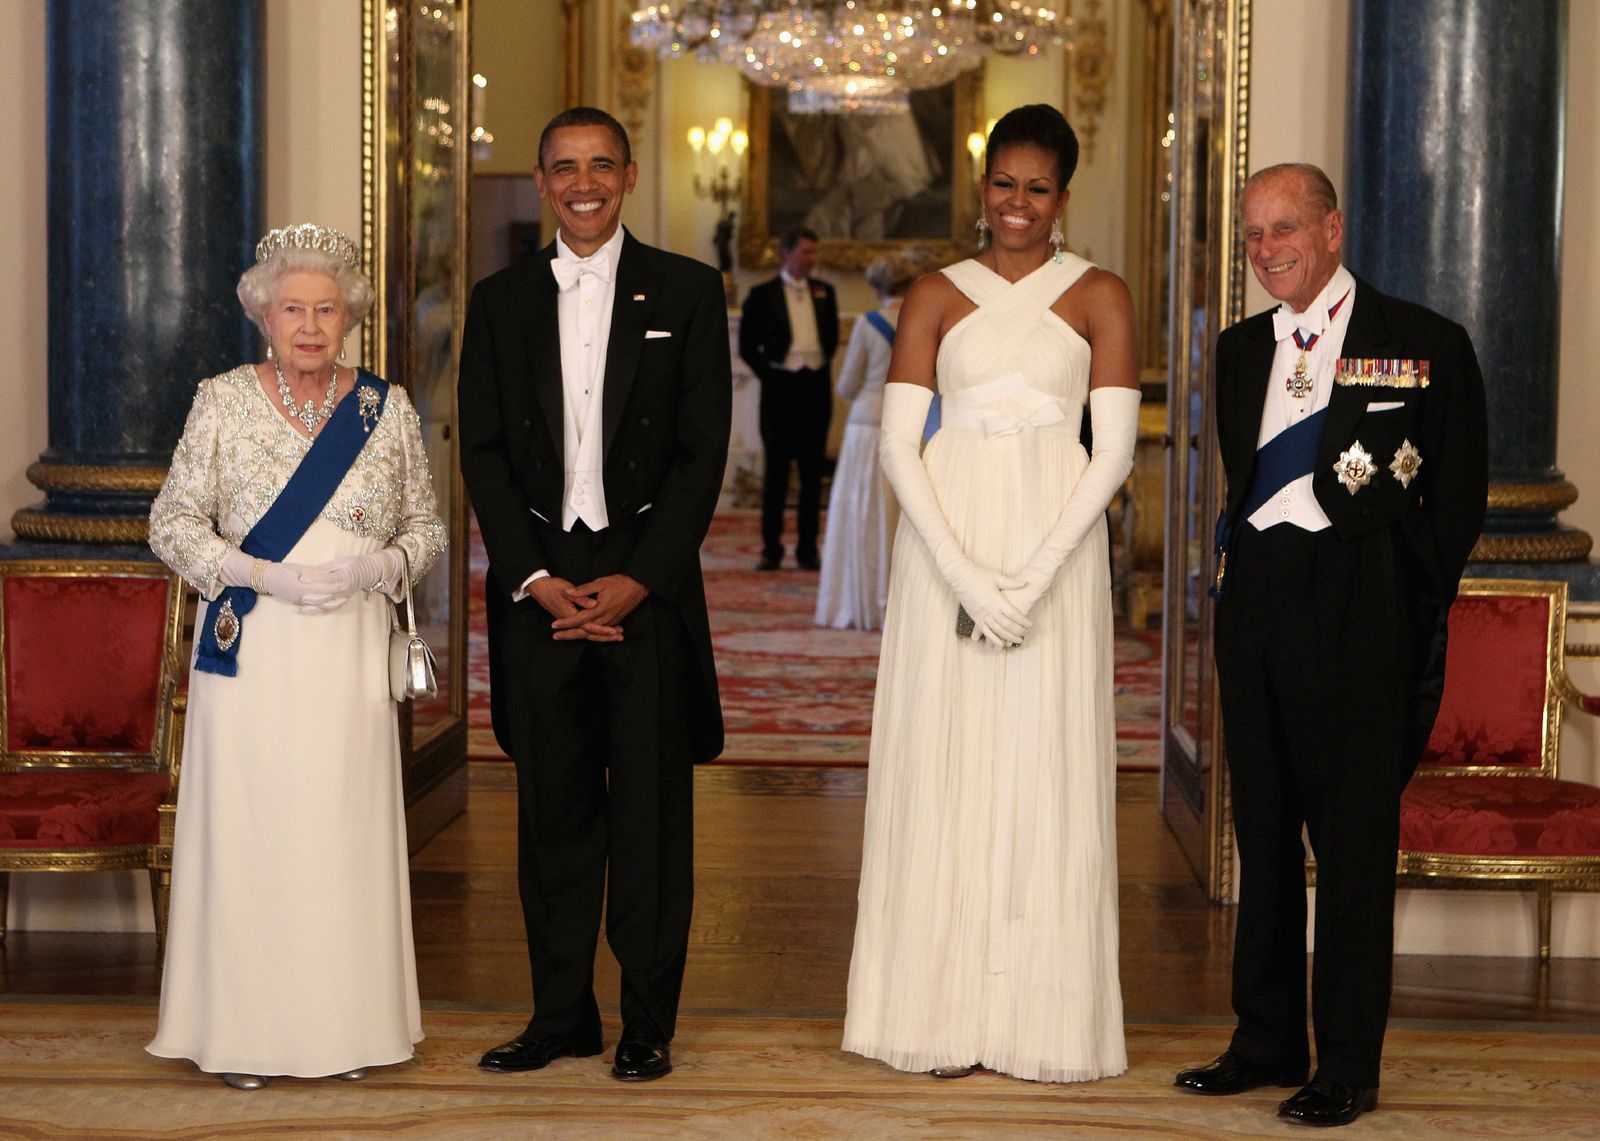 Queen Elizabeth II poses with Former President Barack Obama, Michelle Obama and Prince Philip, in the Music Room of Buckingham Palace on May 24, 2011 in London, England. | Photo: Getty Images.